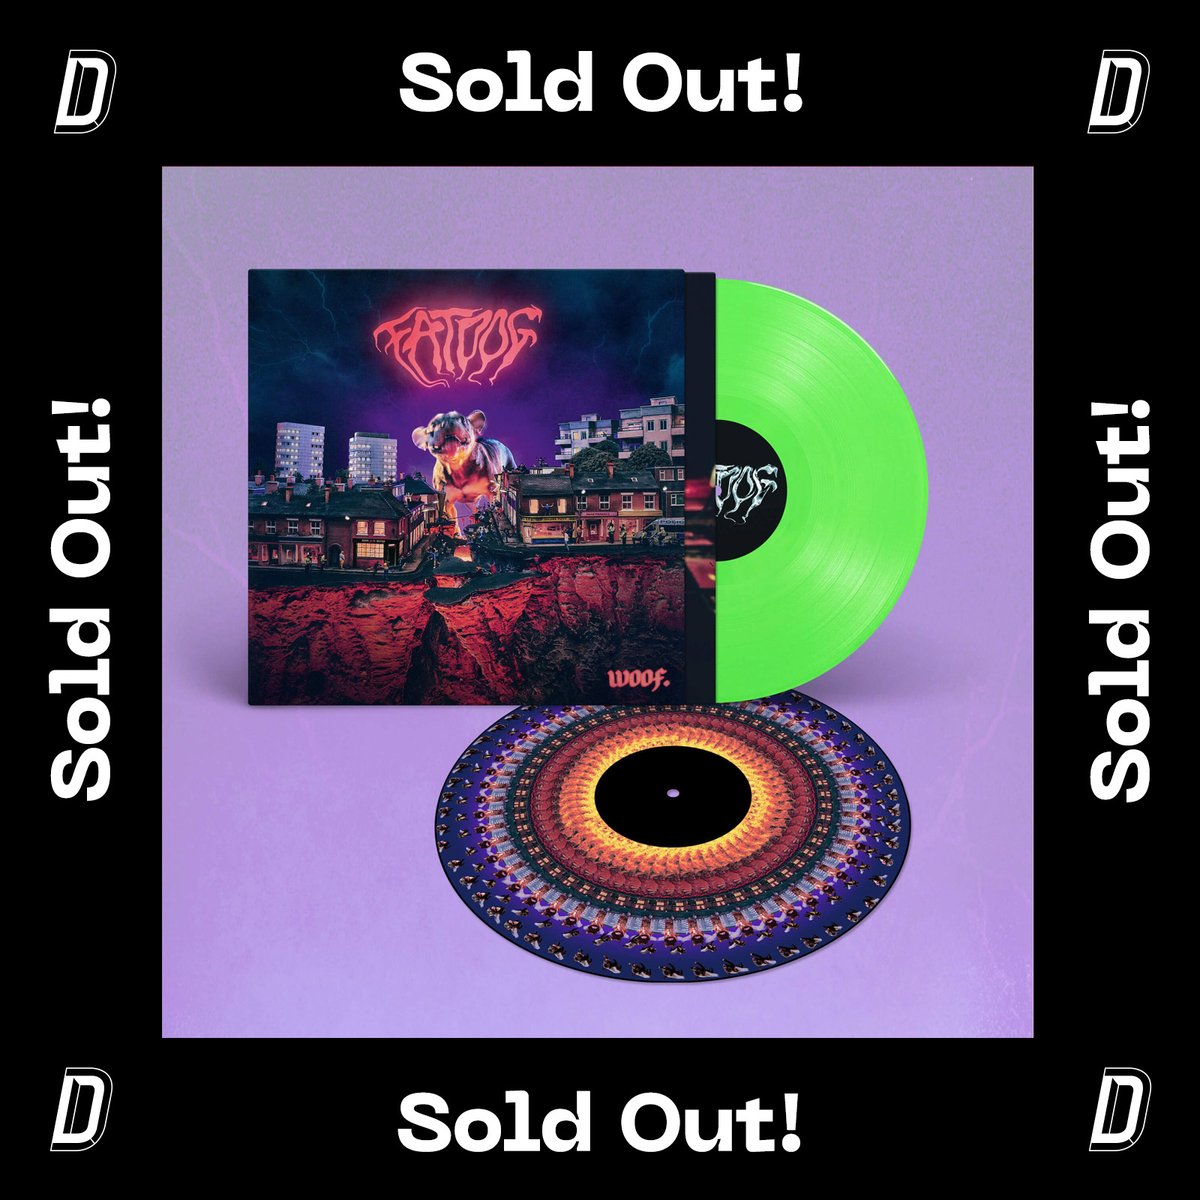 🚨 @fatdog_fatdog’s WOOF, has sold out. Do check in with your local #DinkedEdition shop around September 6th for any last copies. @dinkededition 🤝 @Dominorecordco